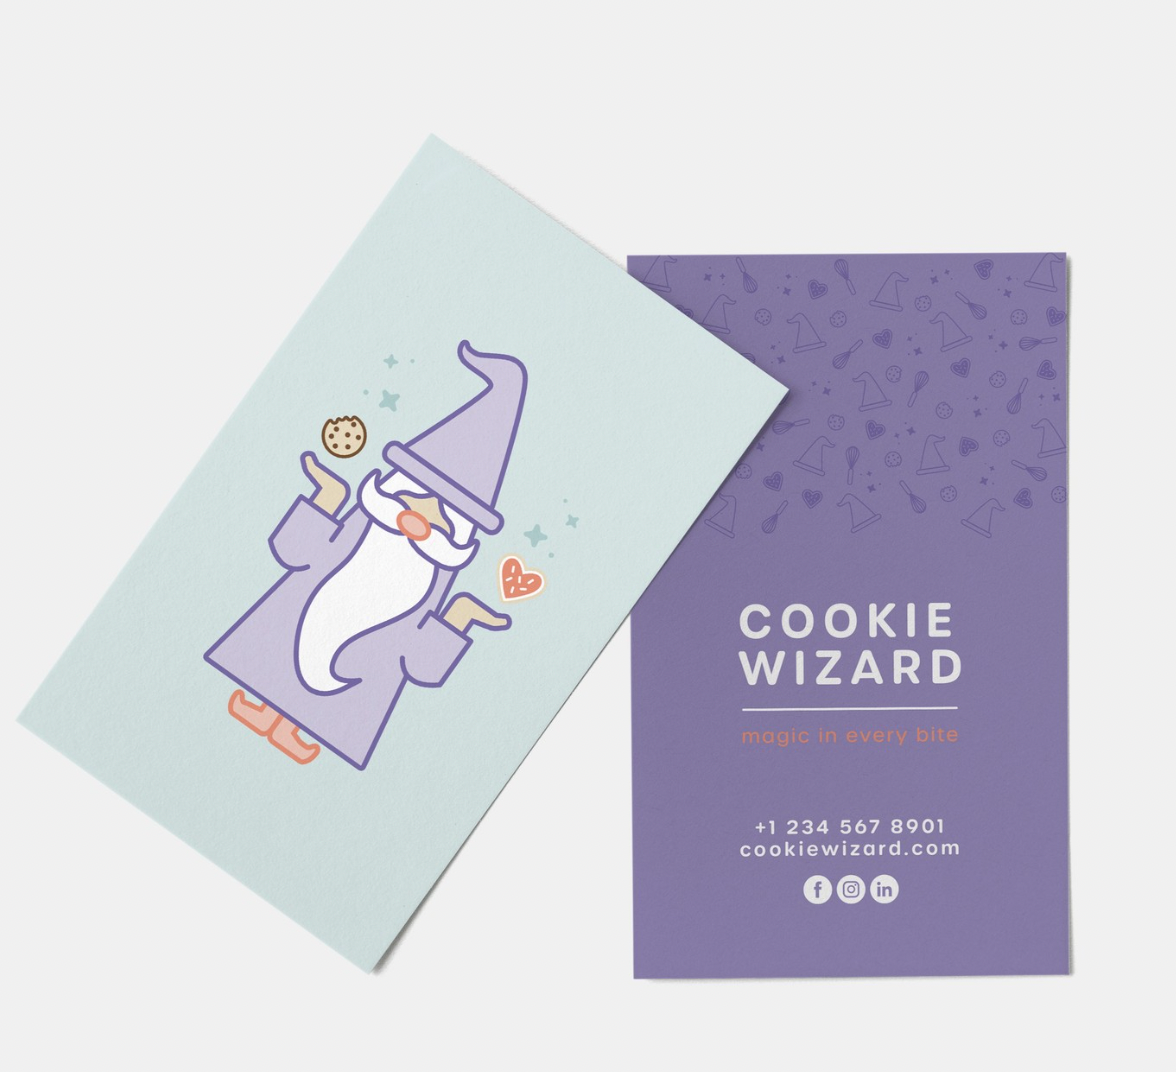 Vertical card with wizard holding a floating heart and a cookie, on one side and text on the other.